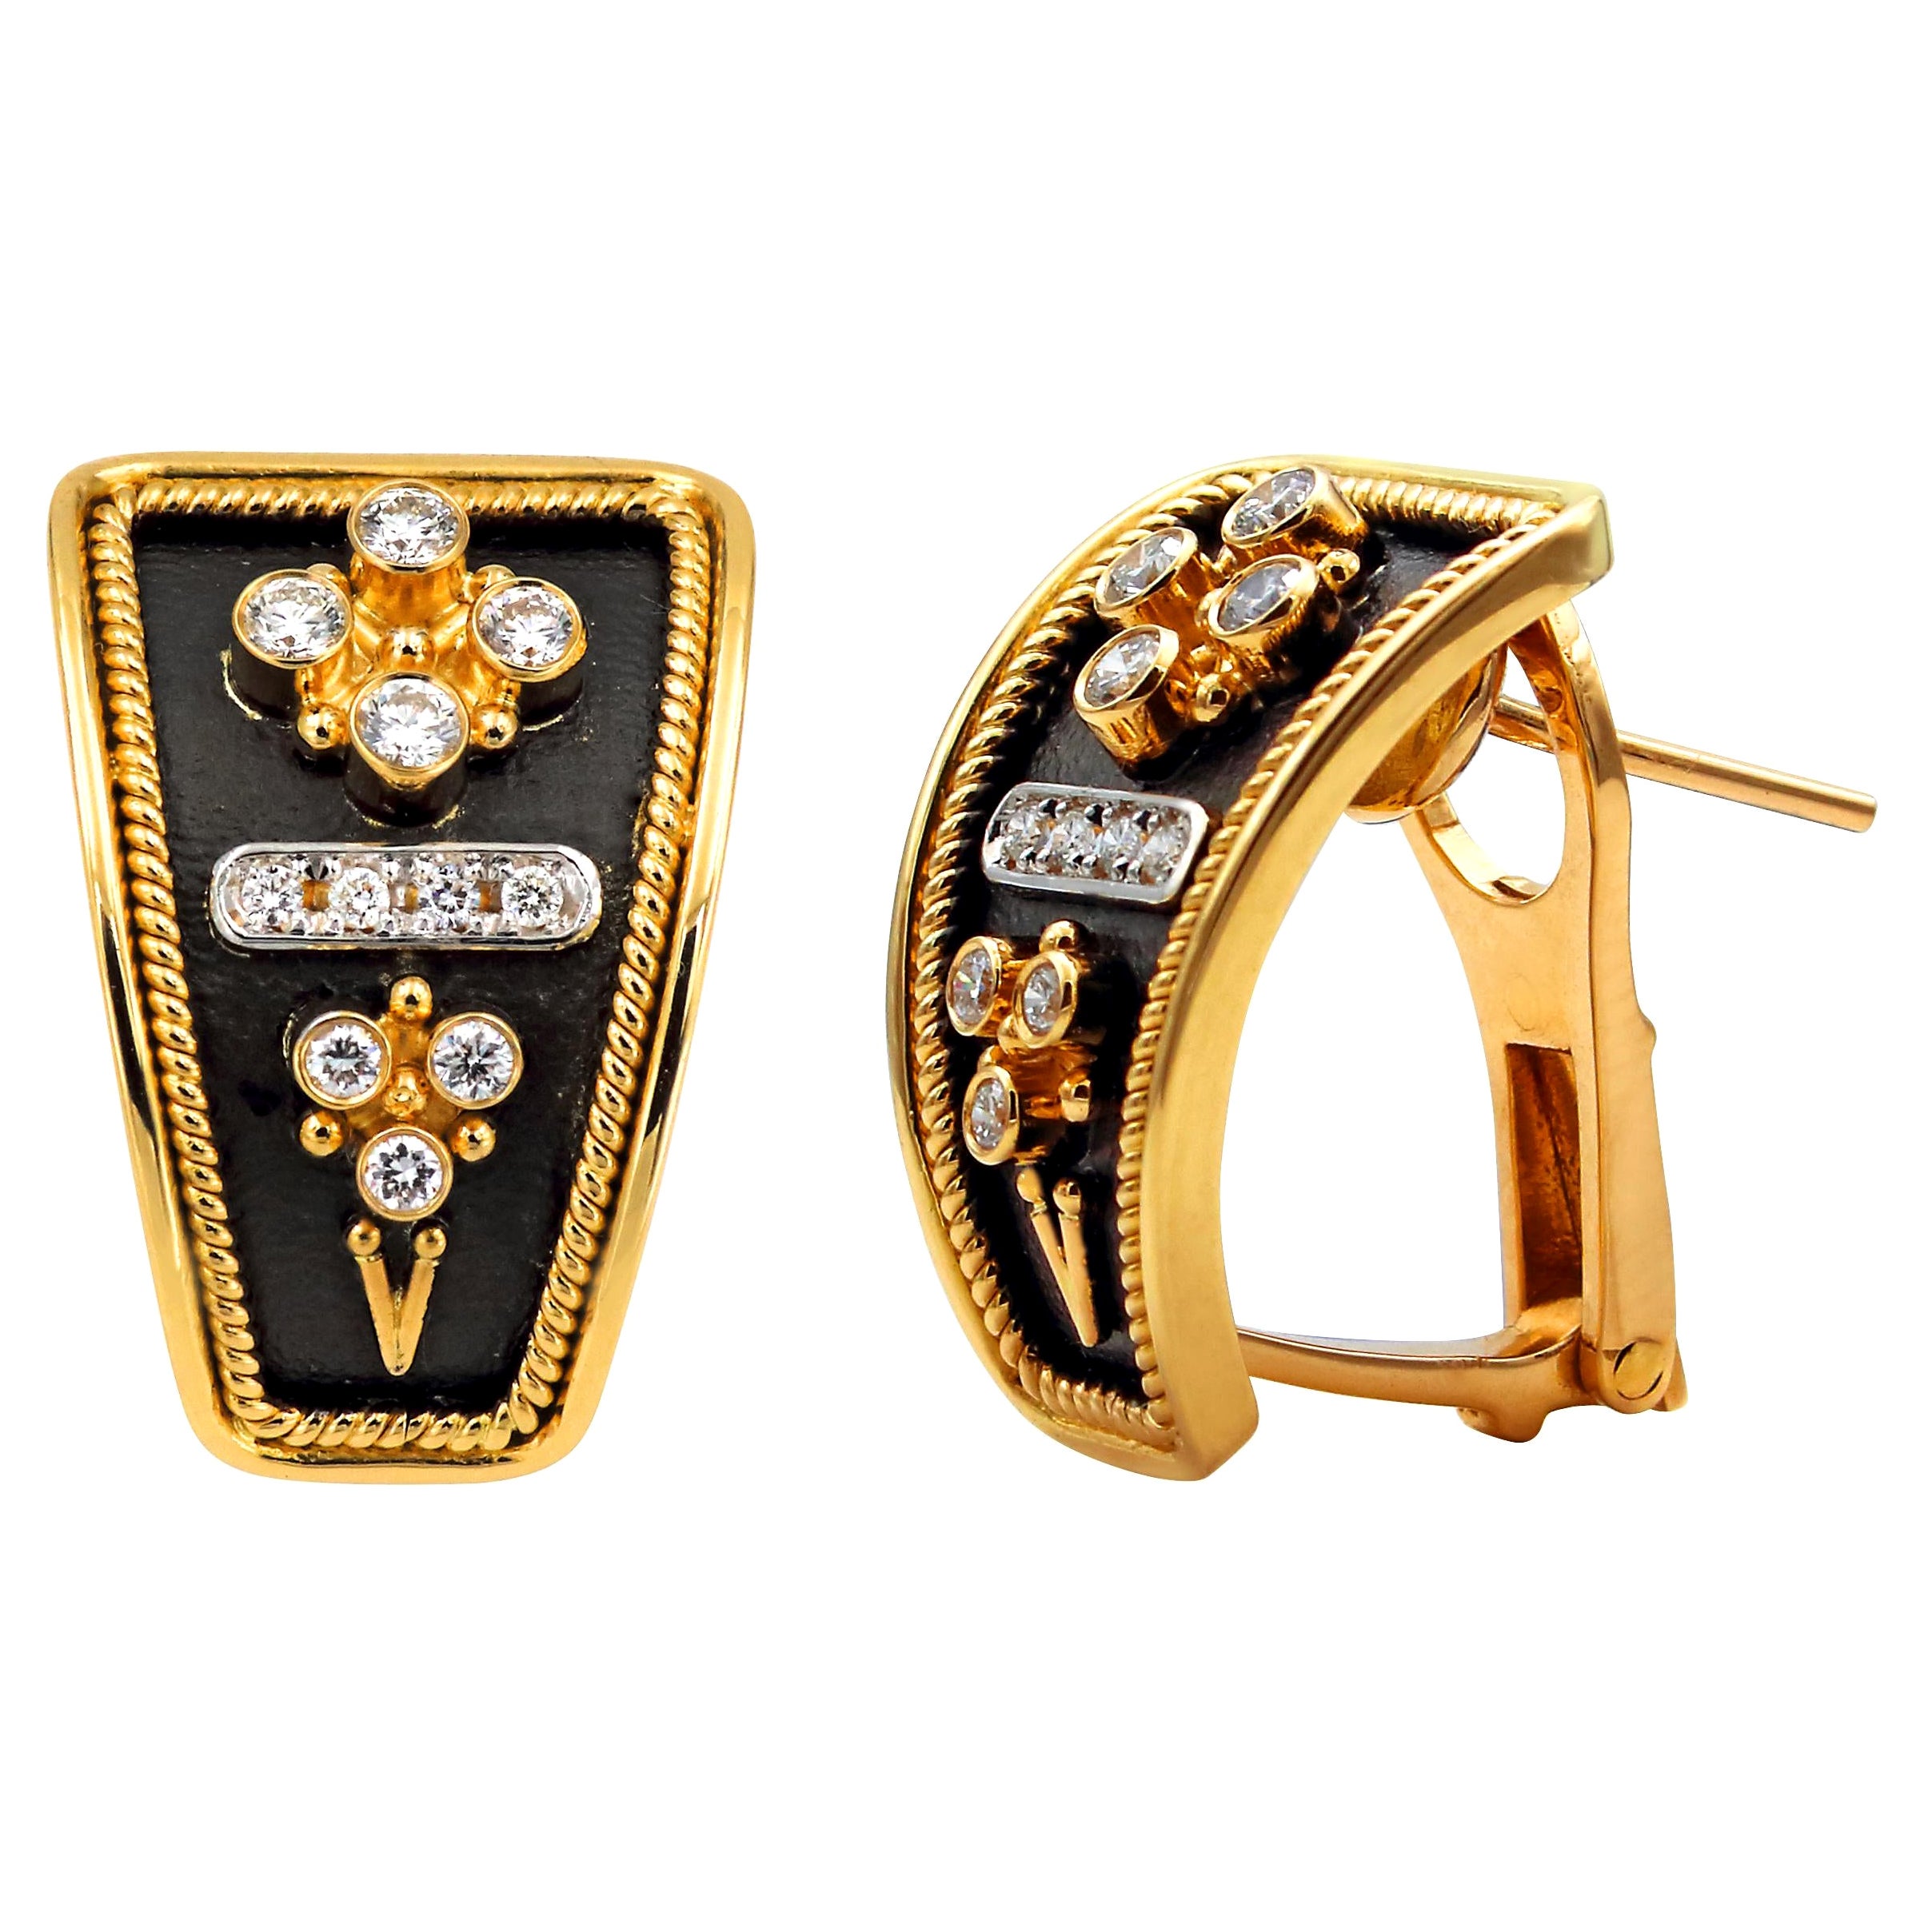 Dimos 18k Gold Byzantine Inspired Earrings with Brilliant Diamonds